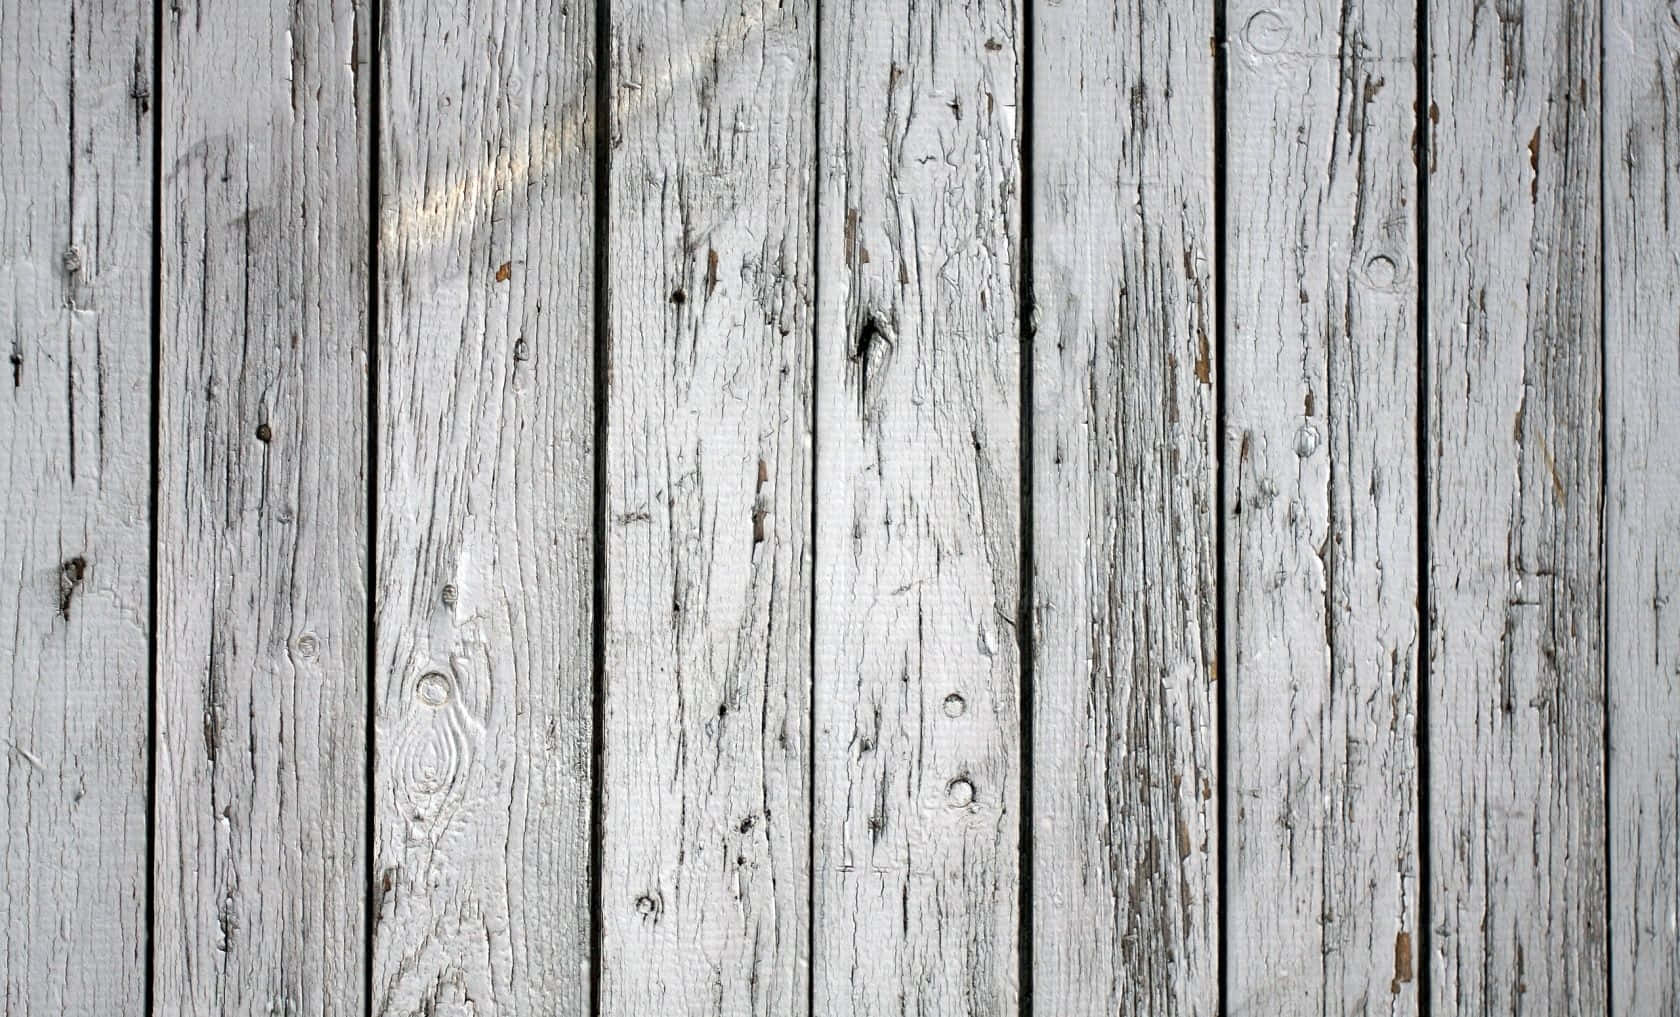 An exquisite wood grain background